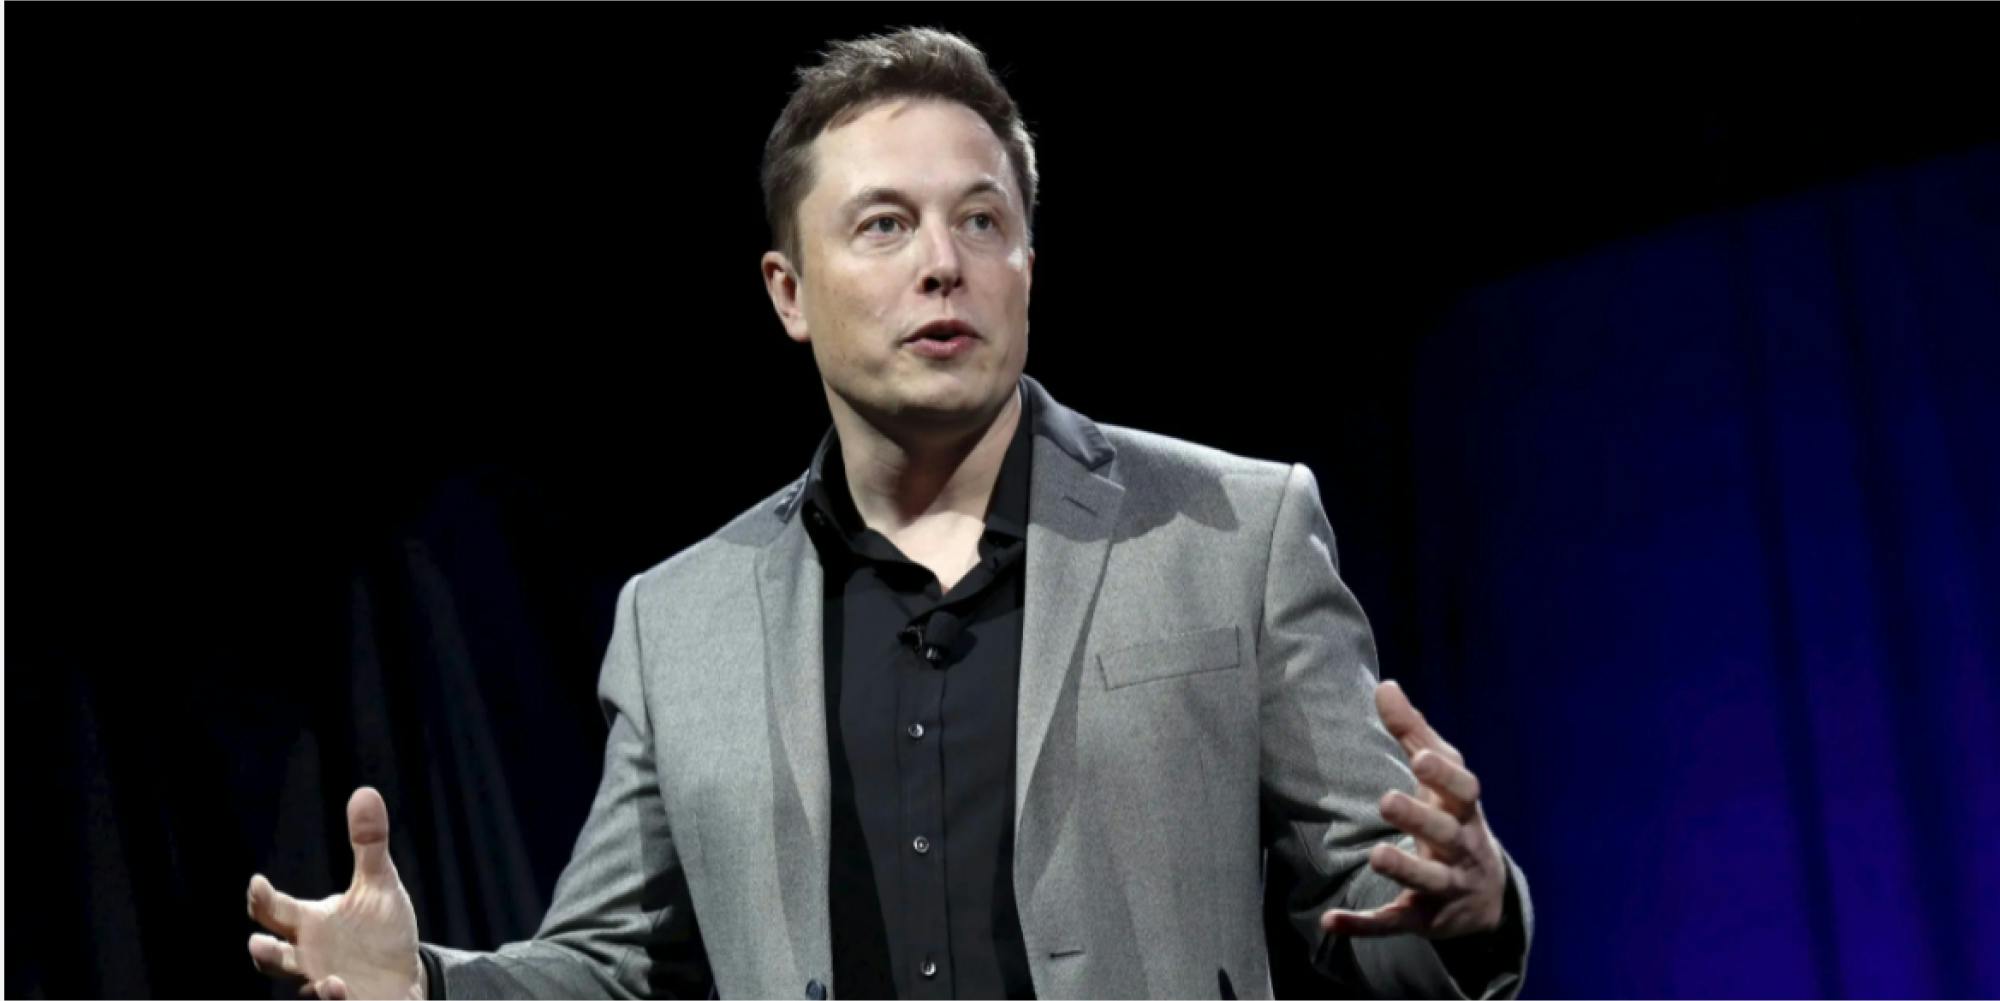 elon musk speaking at an event photo